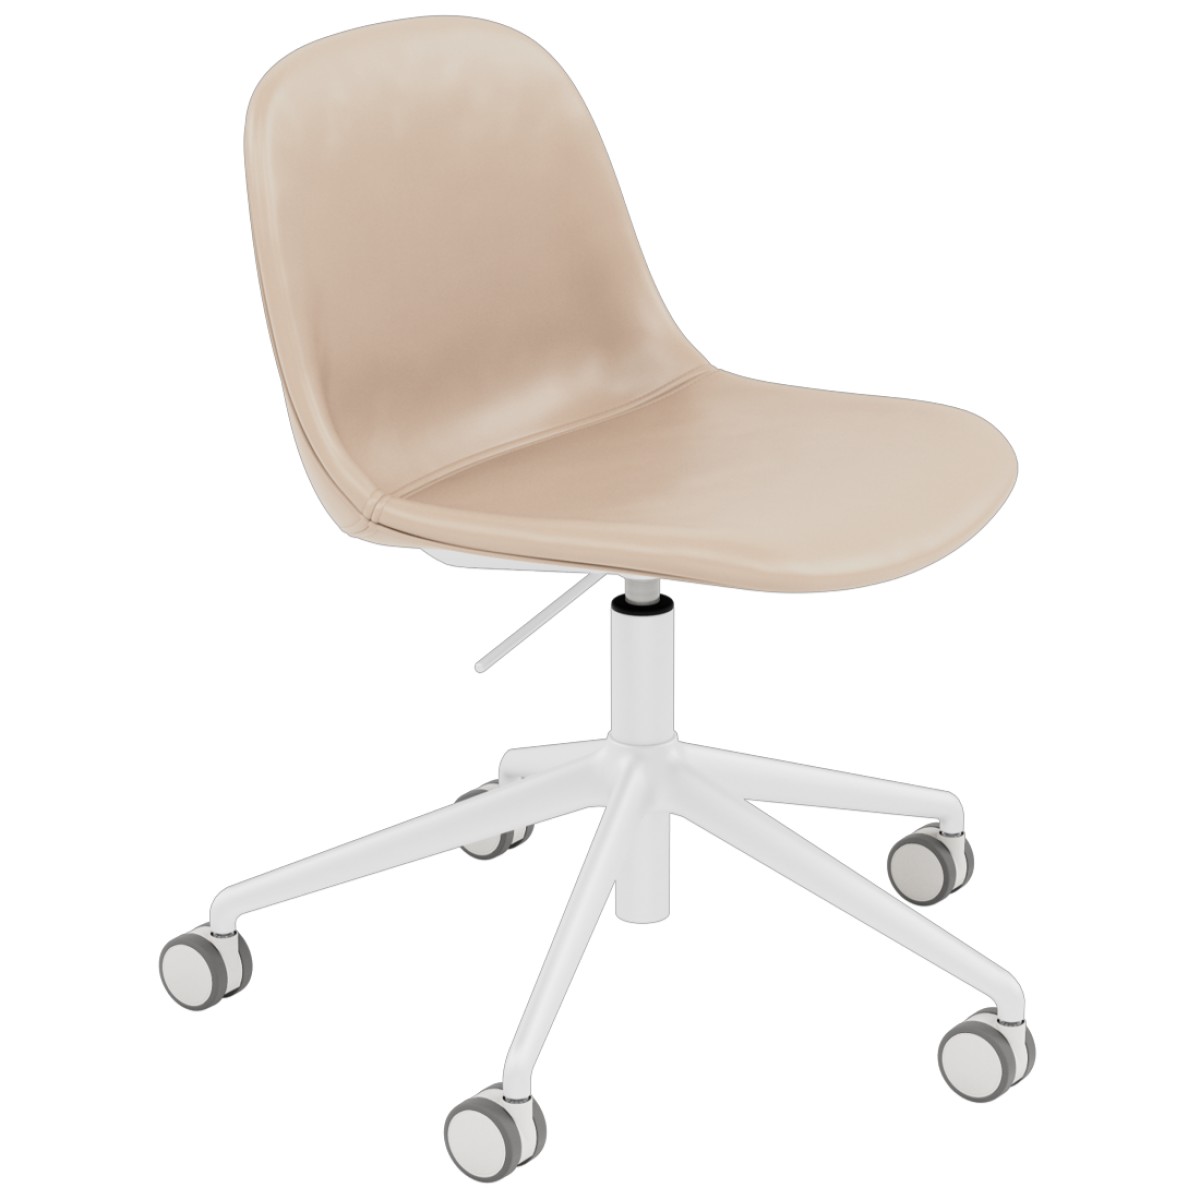 Fiber Side Chair / Swivel Base with Gas Lift and Castors (Full Upholstery)